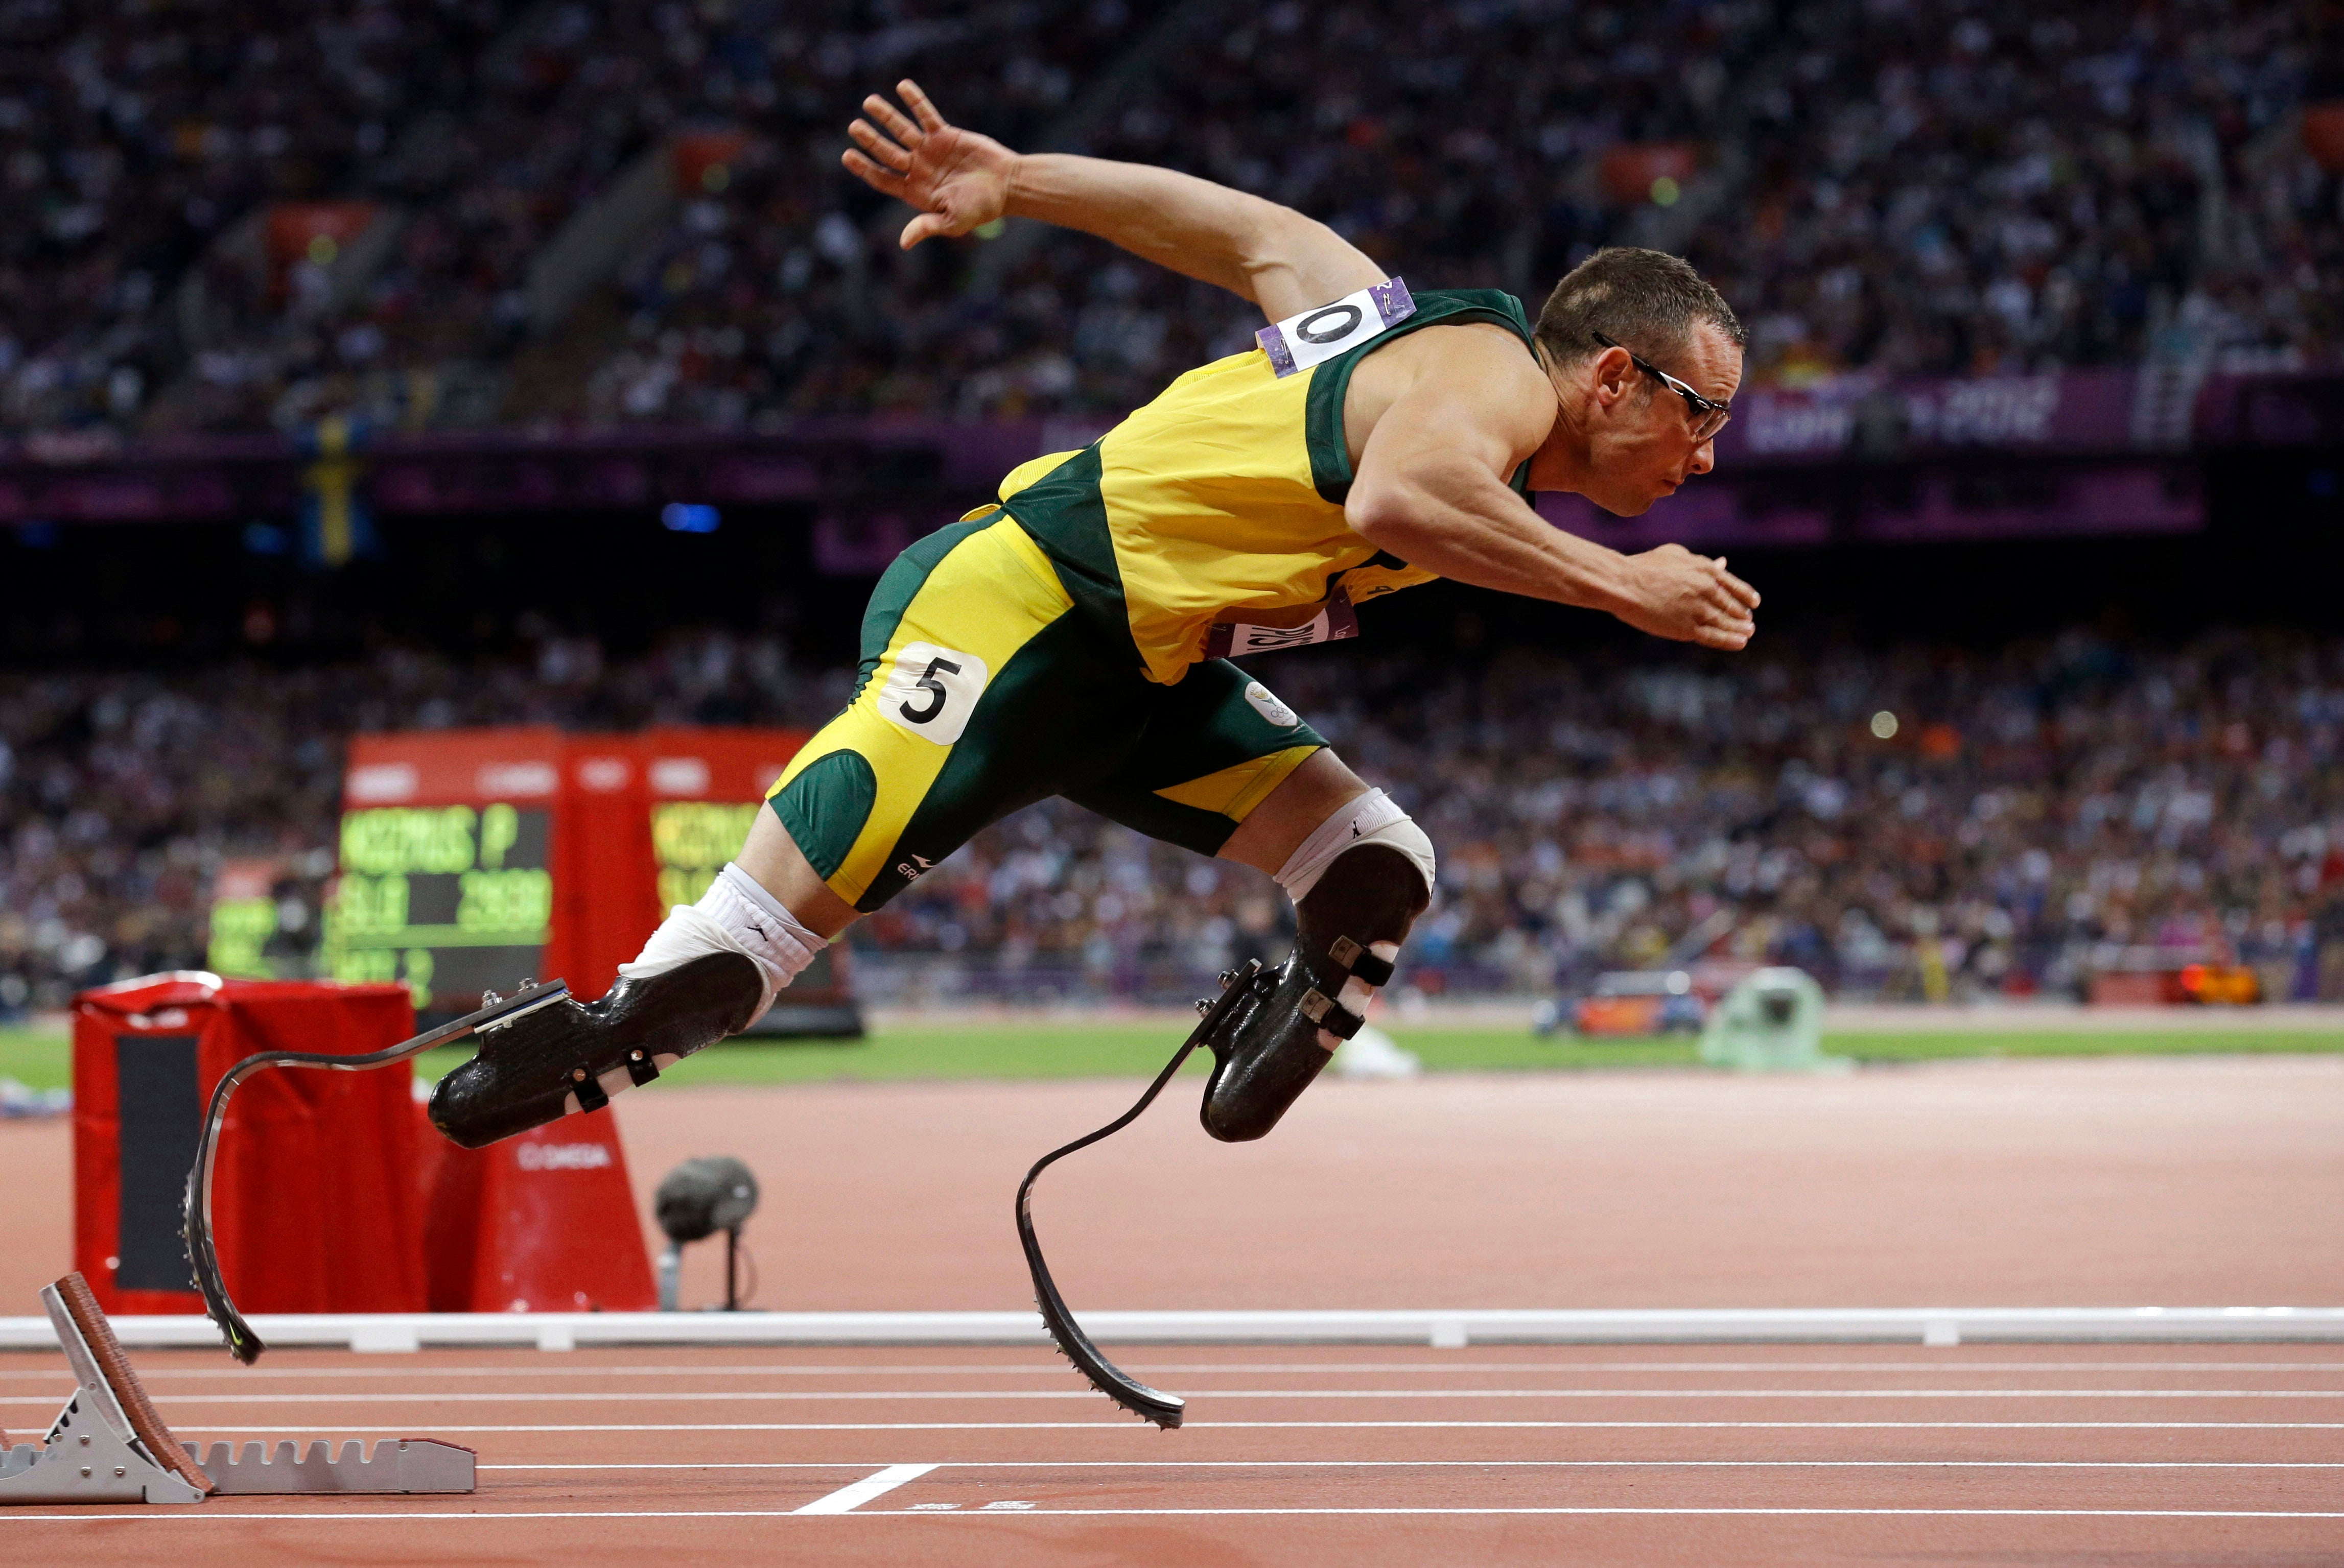 Pistorius won gold at the 2004, 2008 and 2012 Summer Paralympics